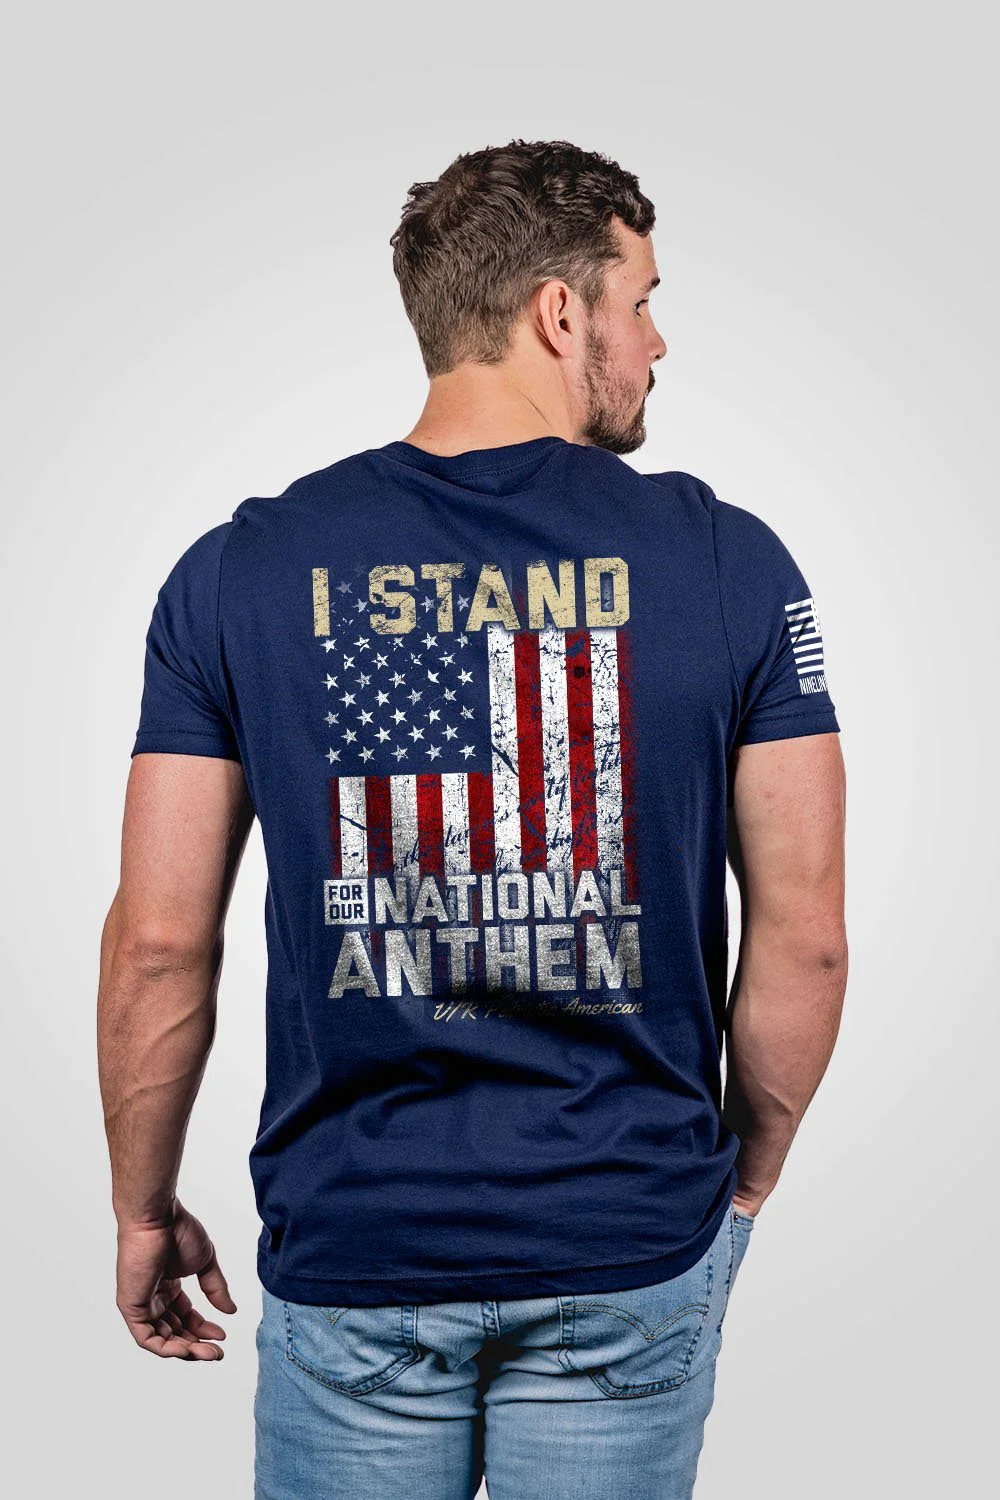 Nine Line Men's I Stand T-Shirt posted by ProdOrigin USA in Men's Apparel